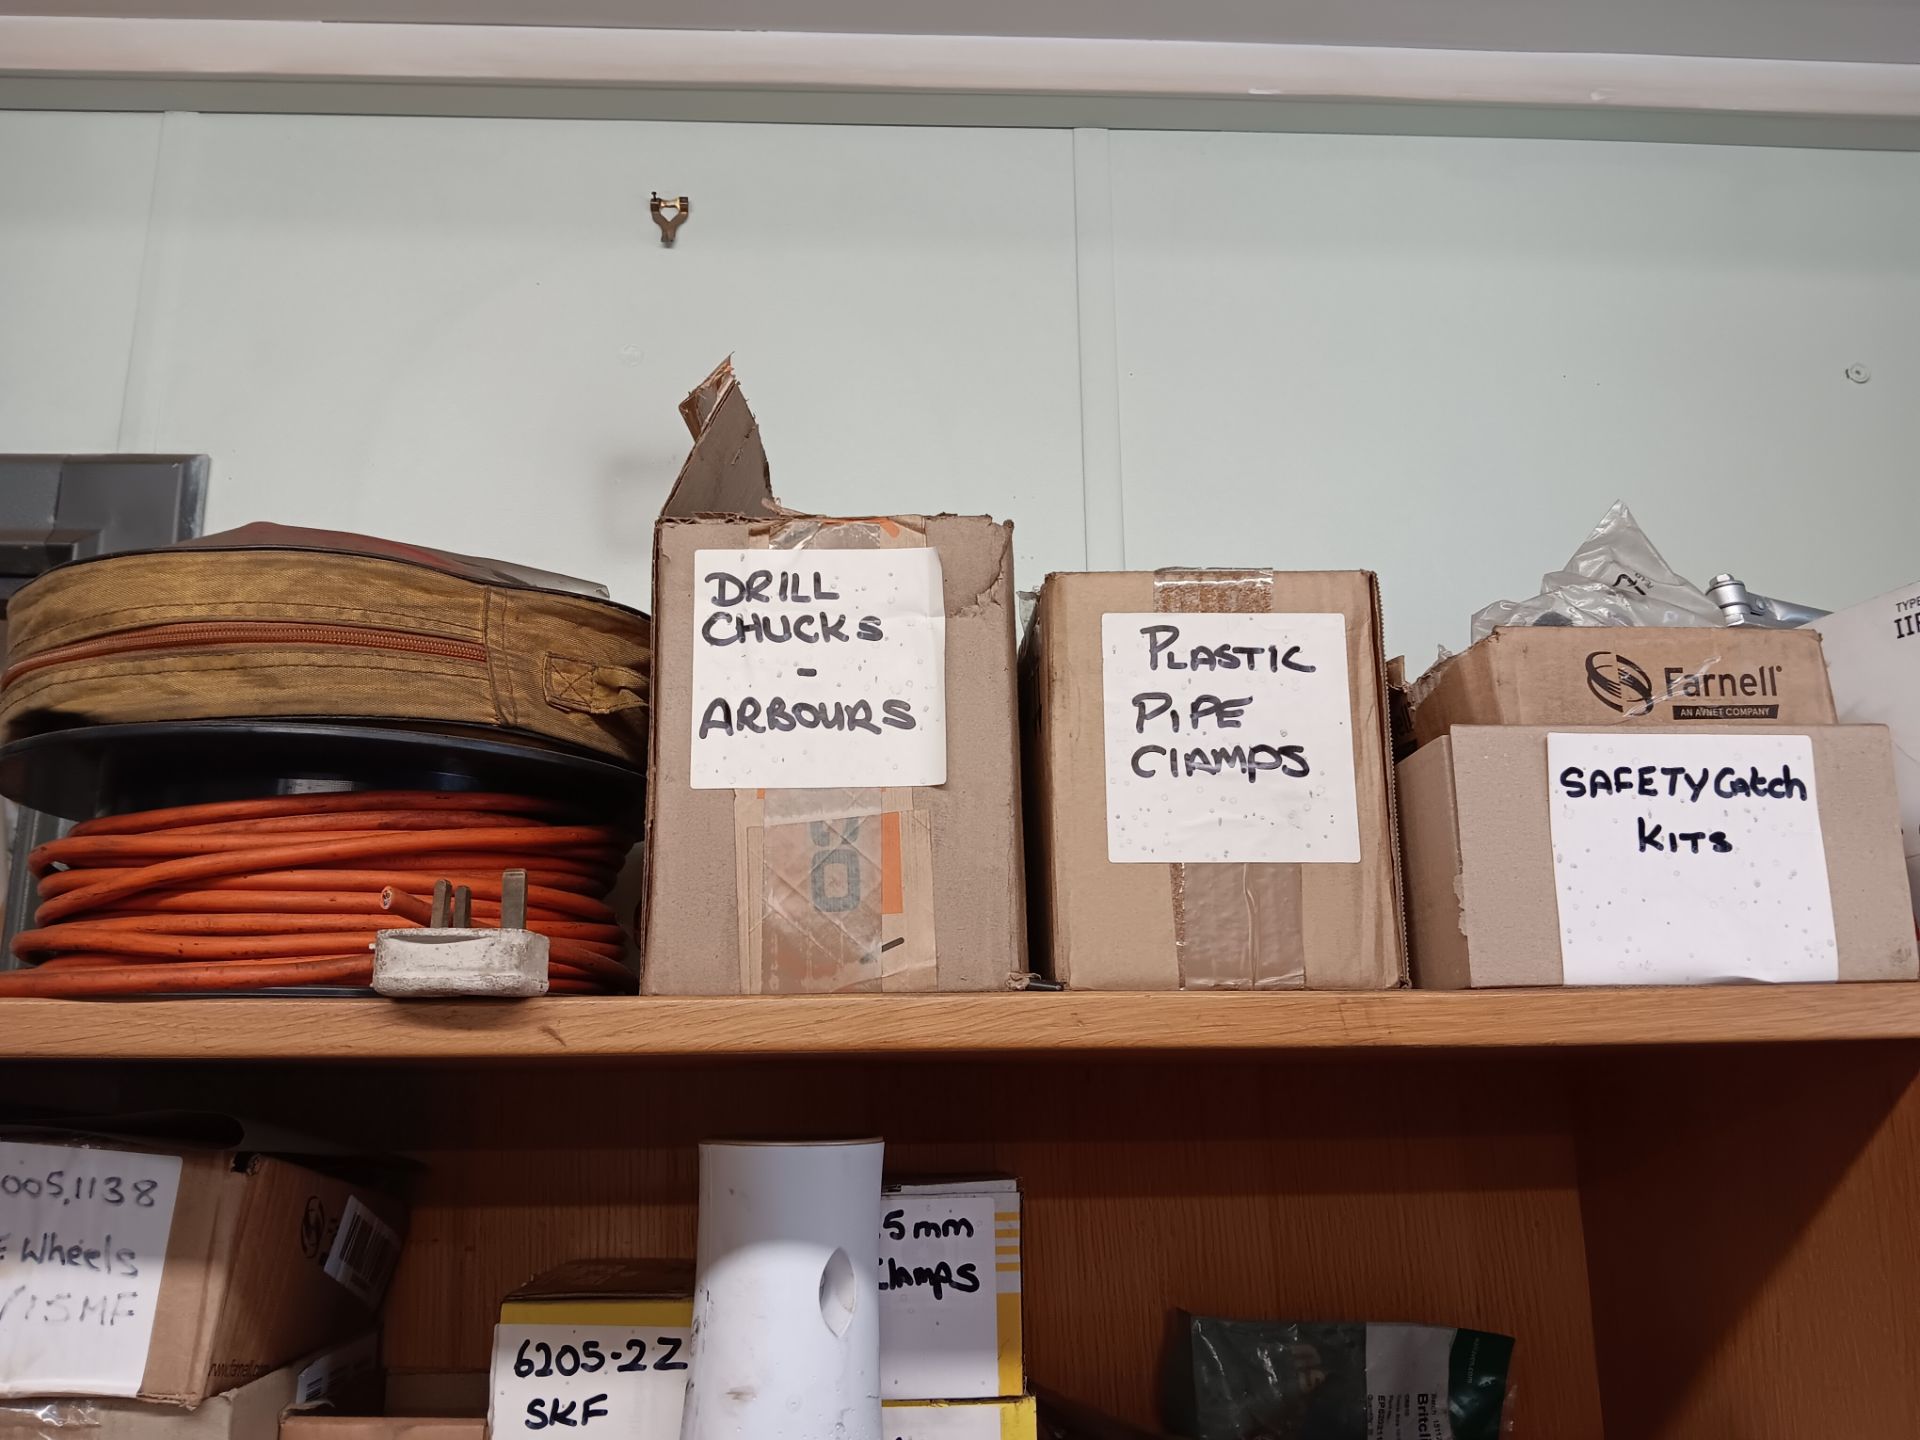 Contents of book shelf to include nuts, bolts, plates, screws etc. - Image 4 of 5